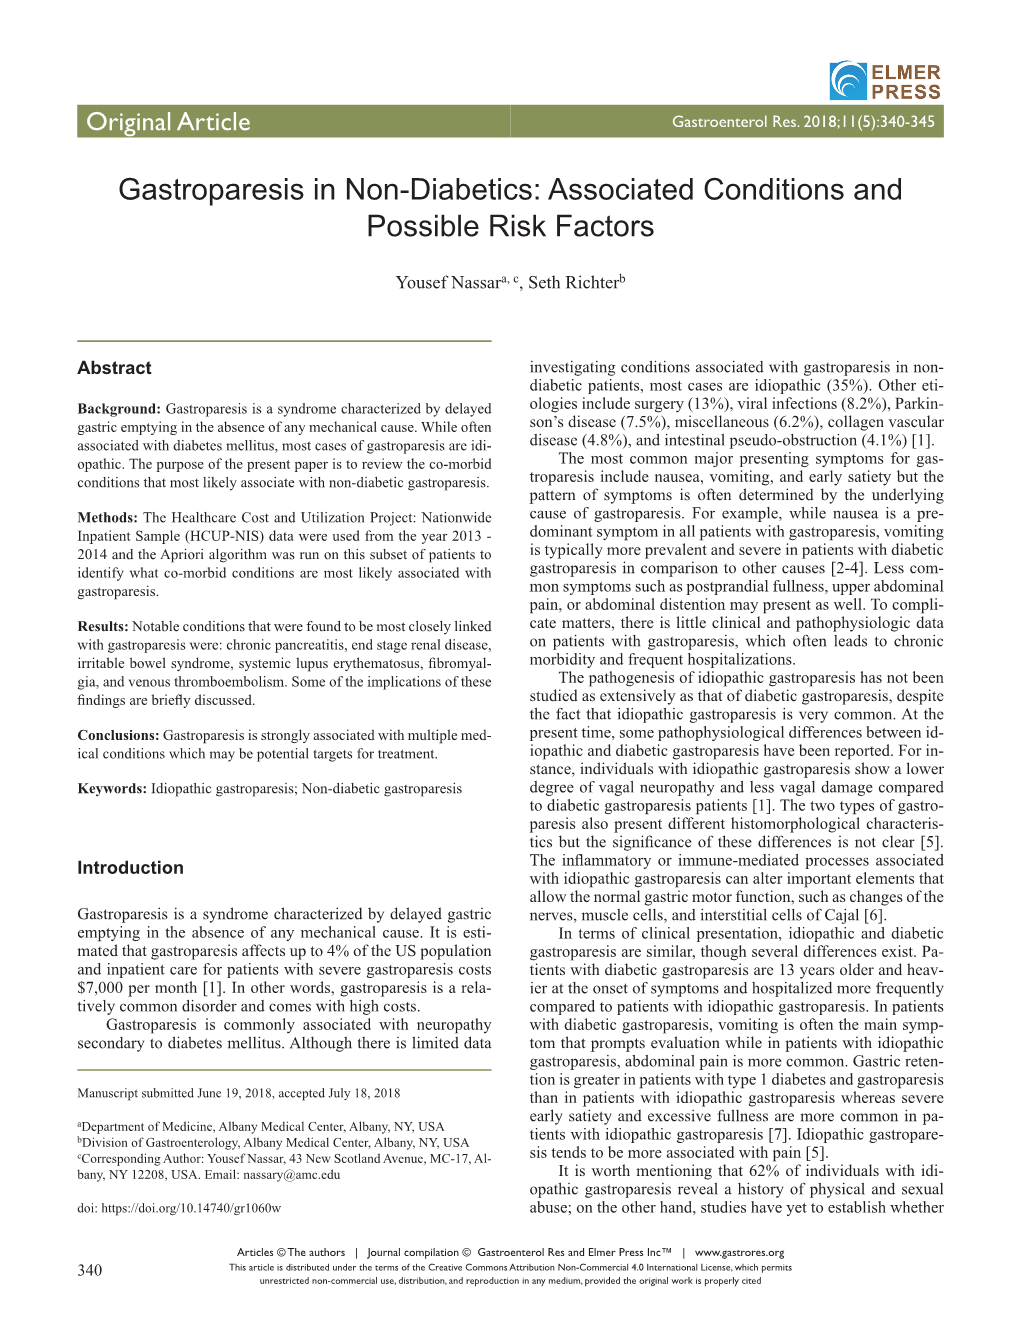 Gastroparesis in Non-Diabetics: Associated Conditions and Possible Risk Factors